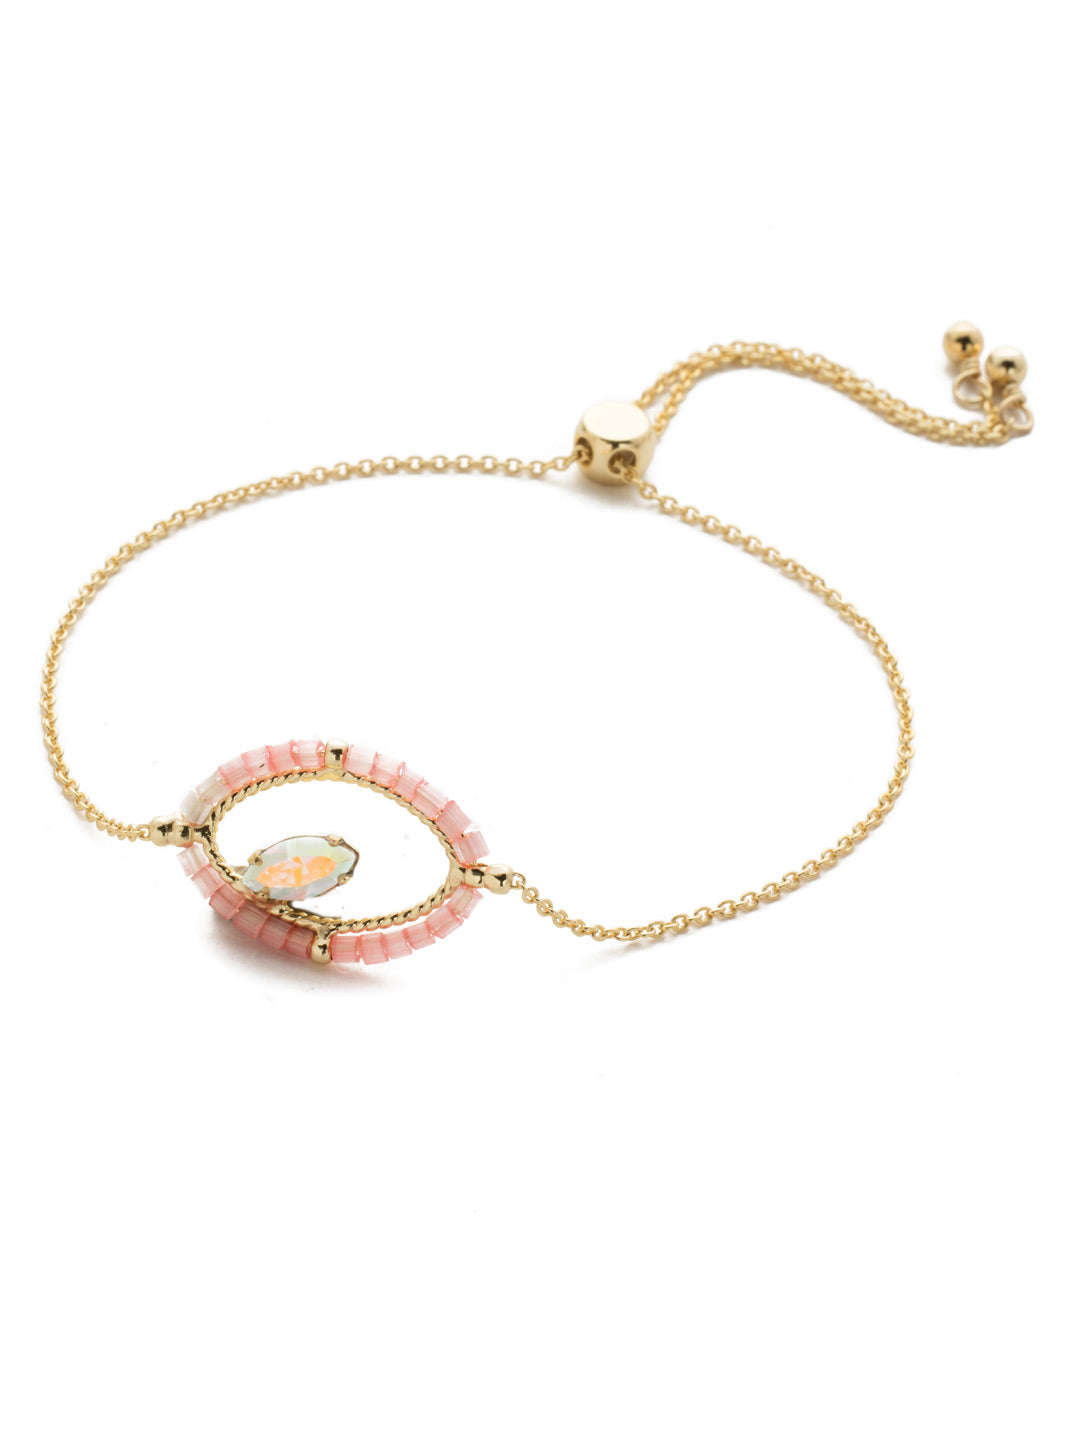 Eye of the Beholder Slider Bracelet - BEK34BGISS - <p>Slide on this attention-getter when you want to be noticed. The single stone encircled in beadwork is one-of-a-kind, just like you. Slider bracelet closure. From Sorrelli's Island Sun collection in our Bright Gold-tone finish.</p>